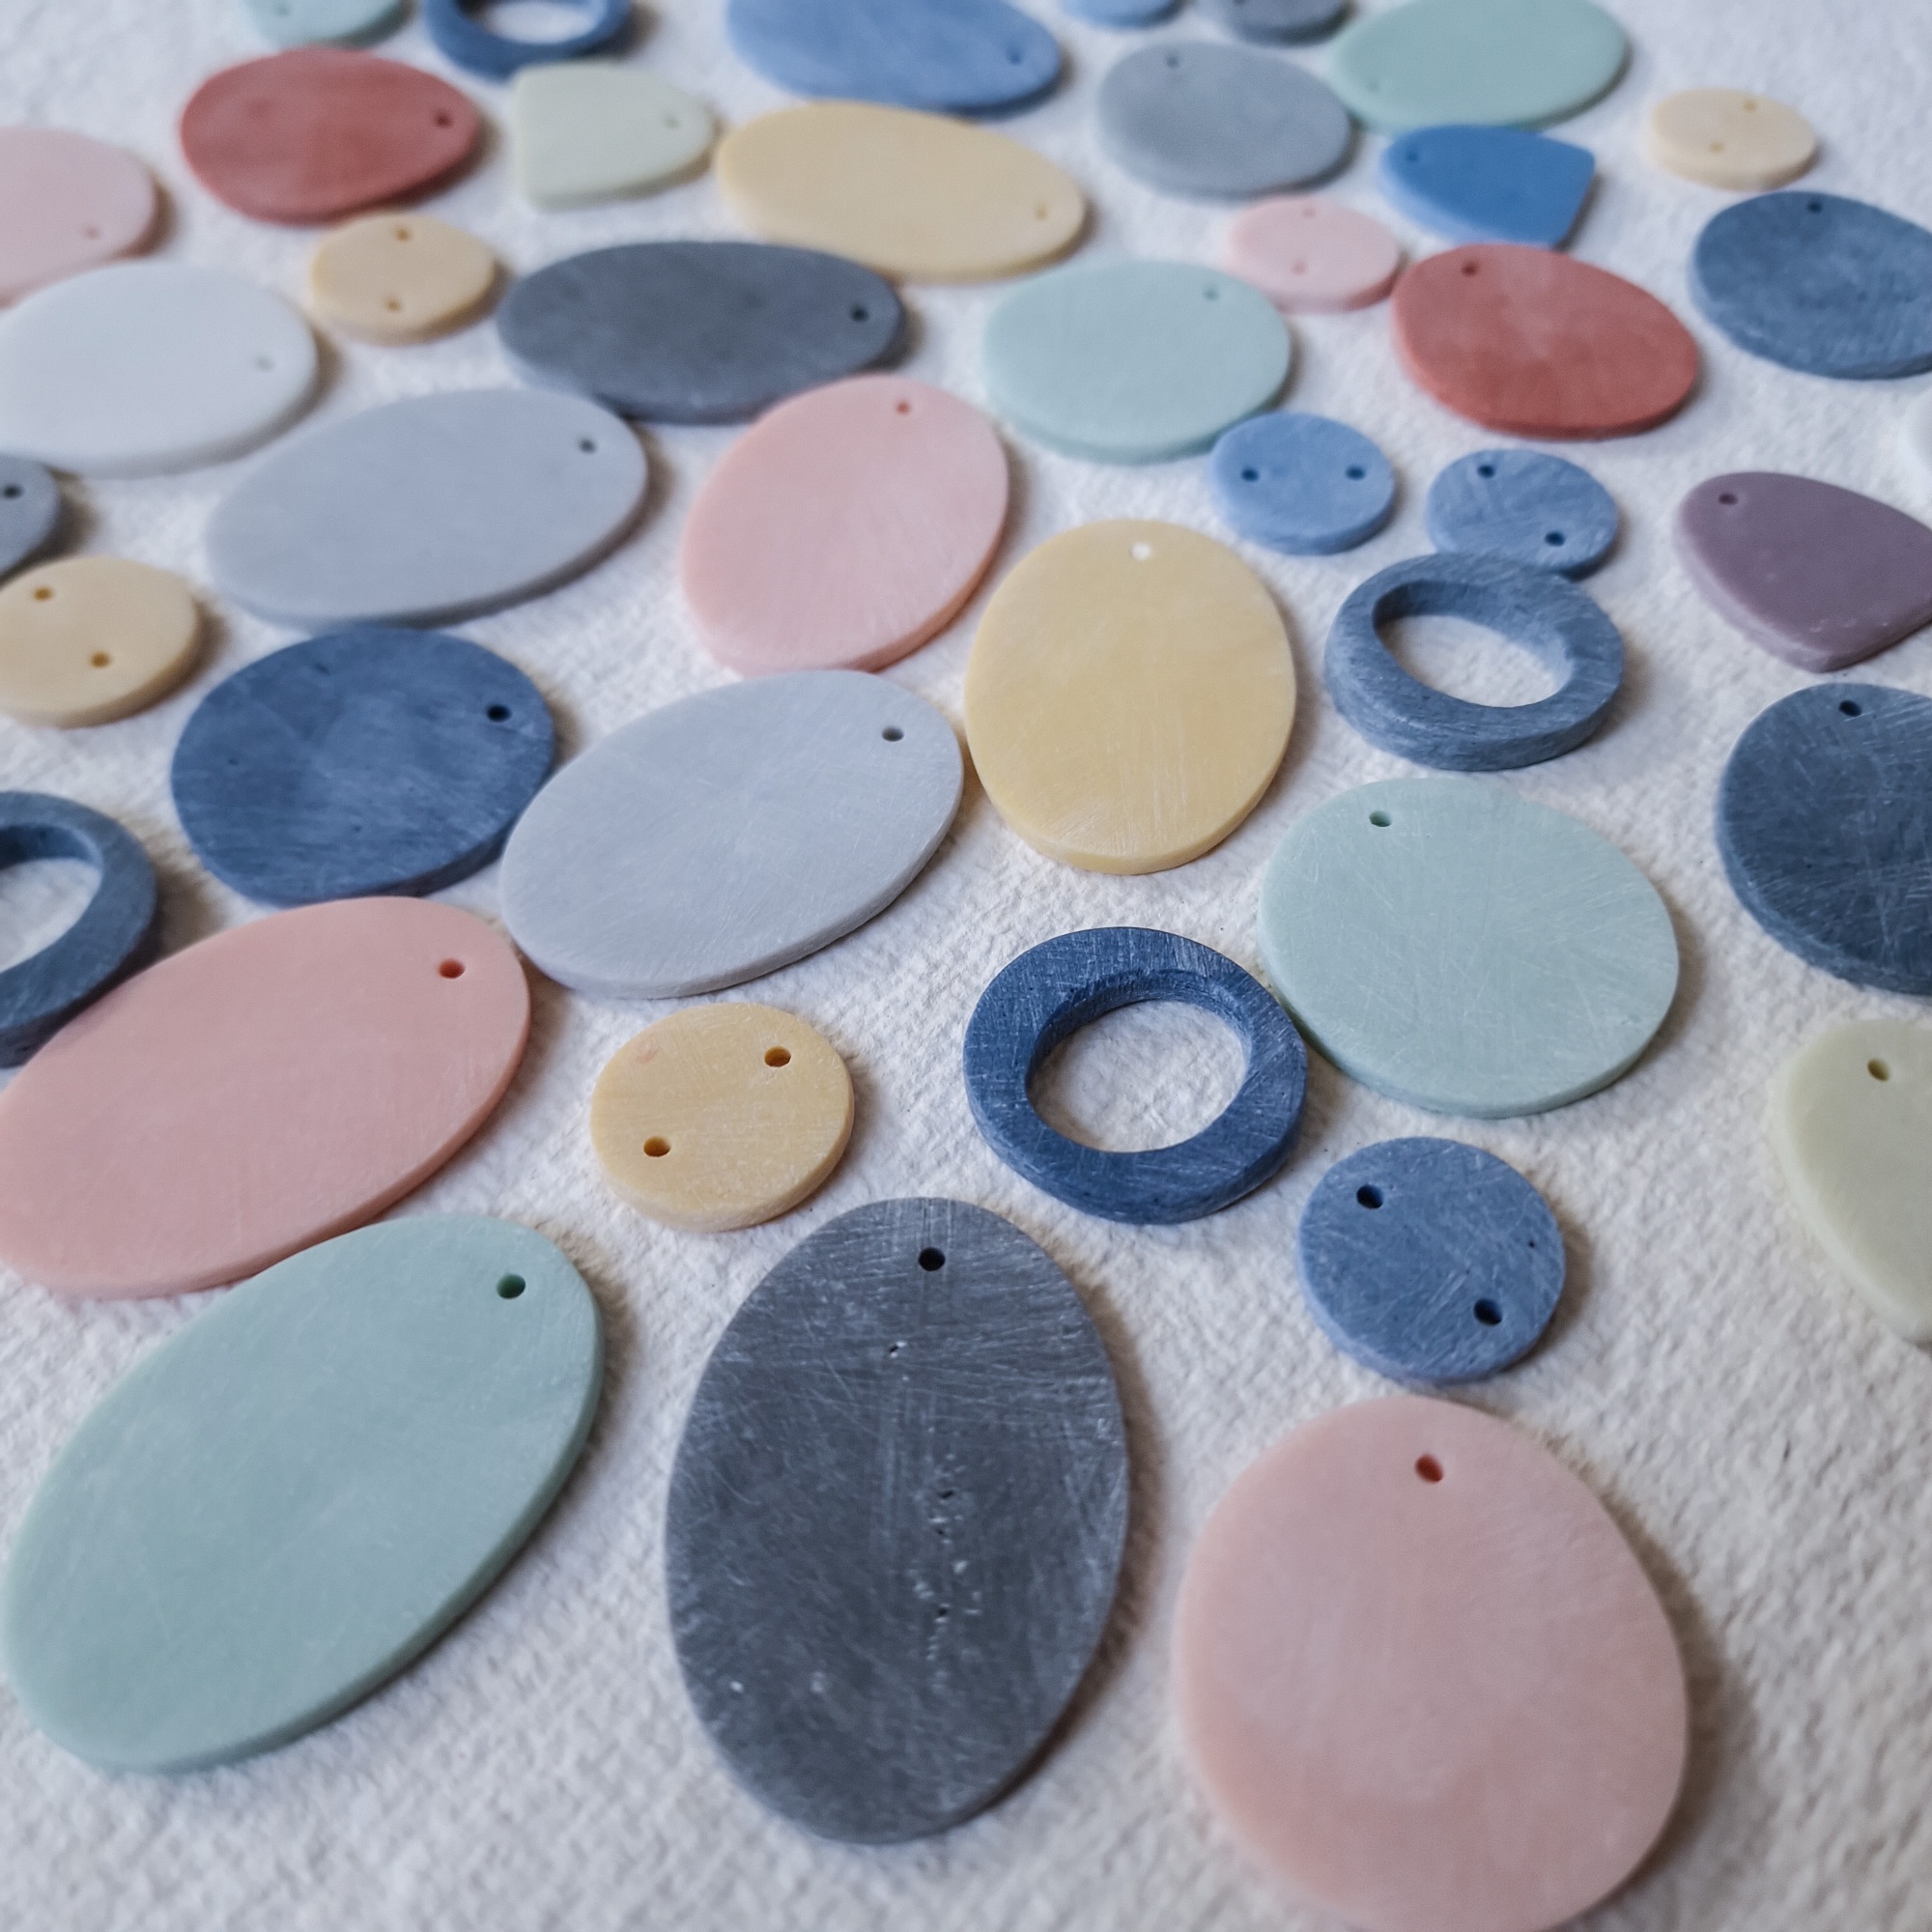 Polymer clay beads sanded ready to be made into earrings